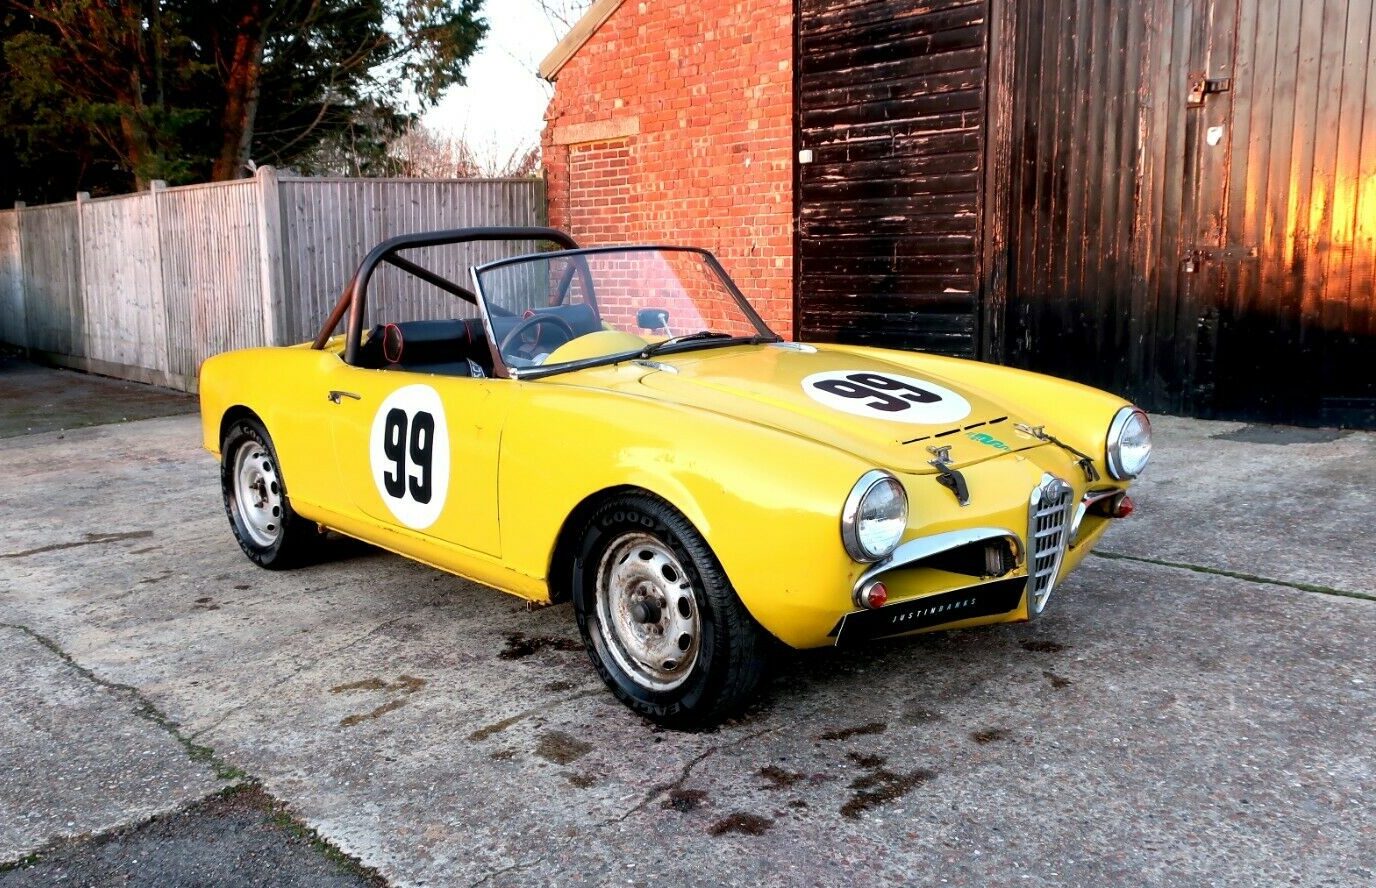 Race or restore? This Alfa Giulia Spider presents a tricky choice